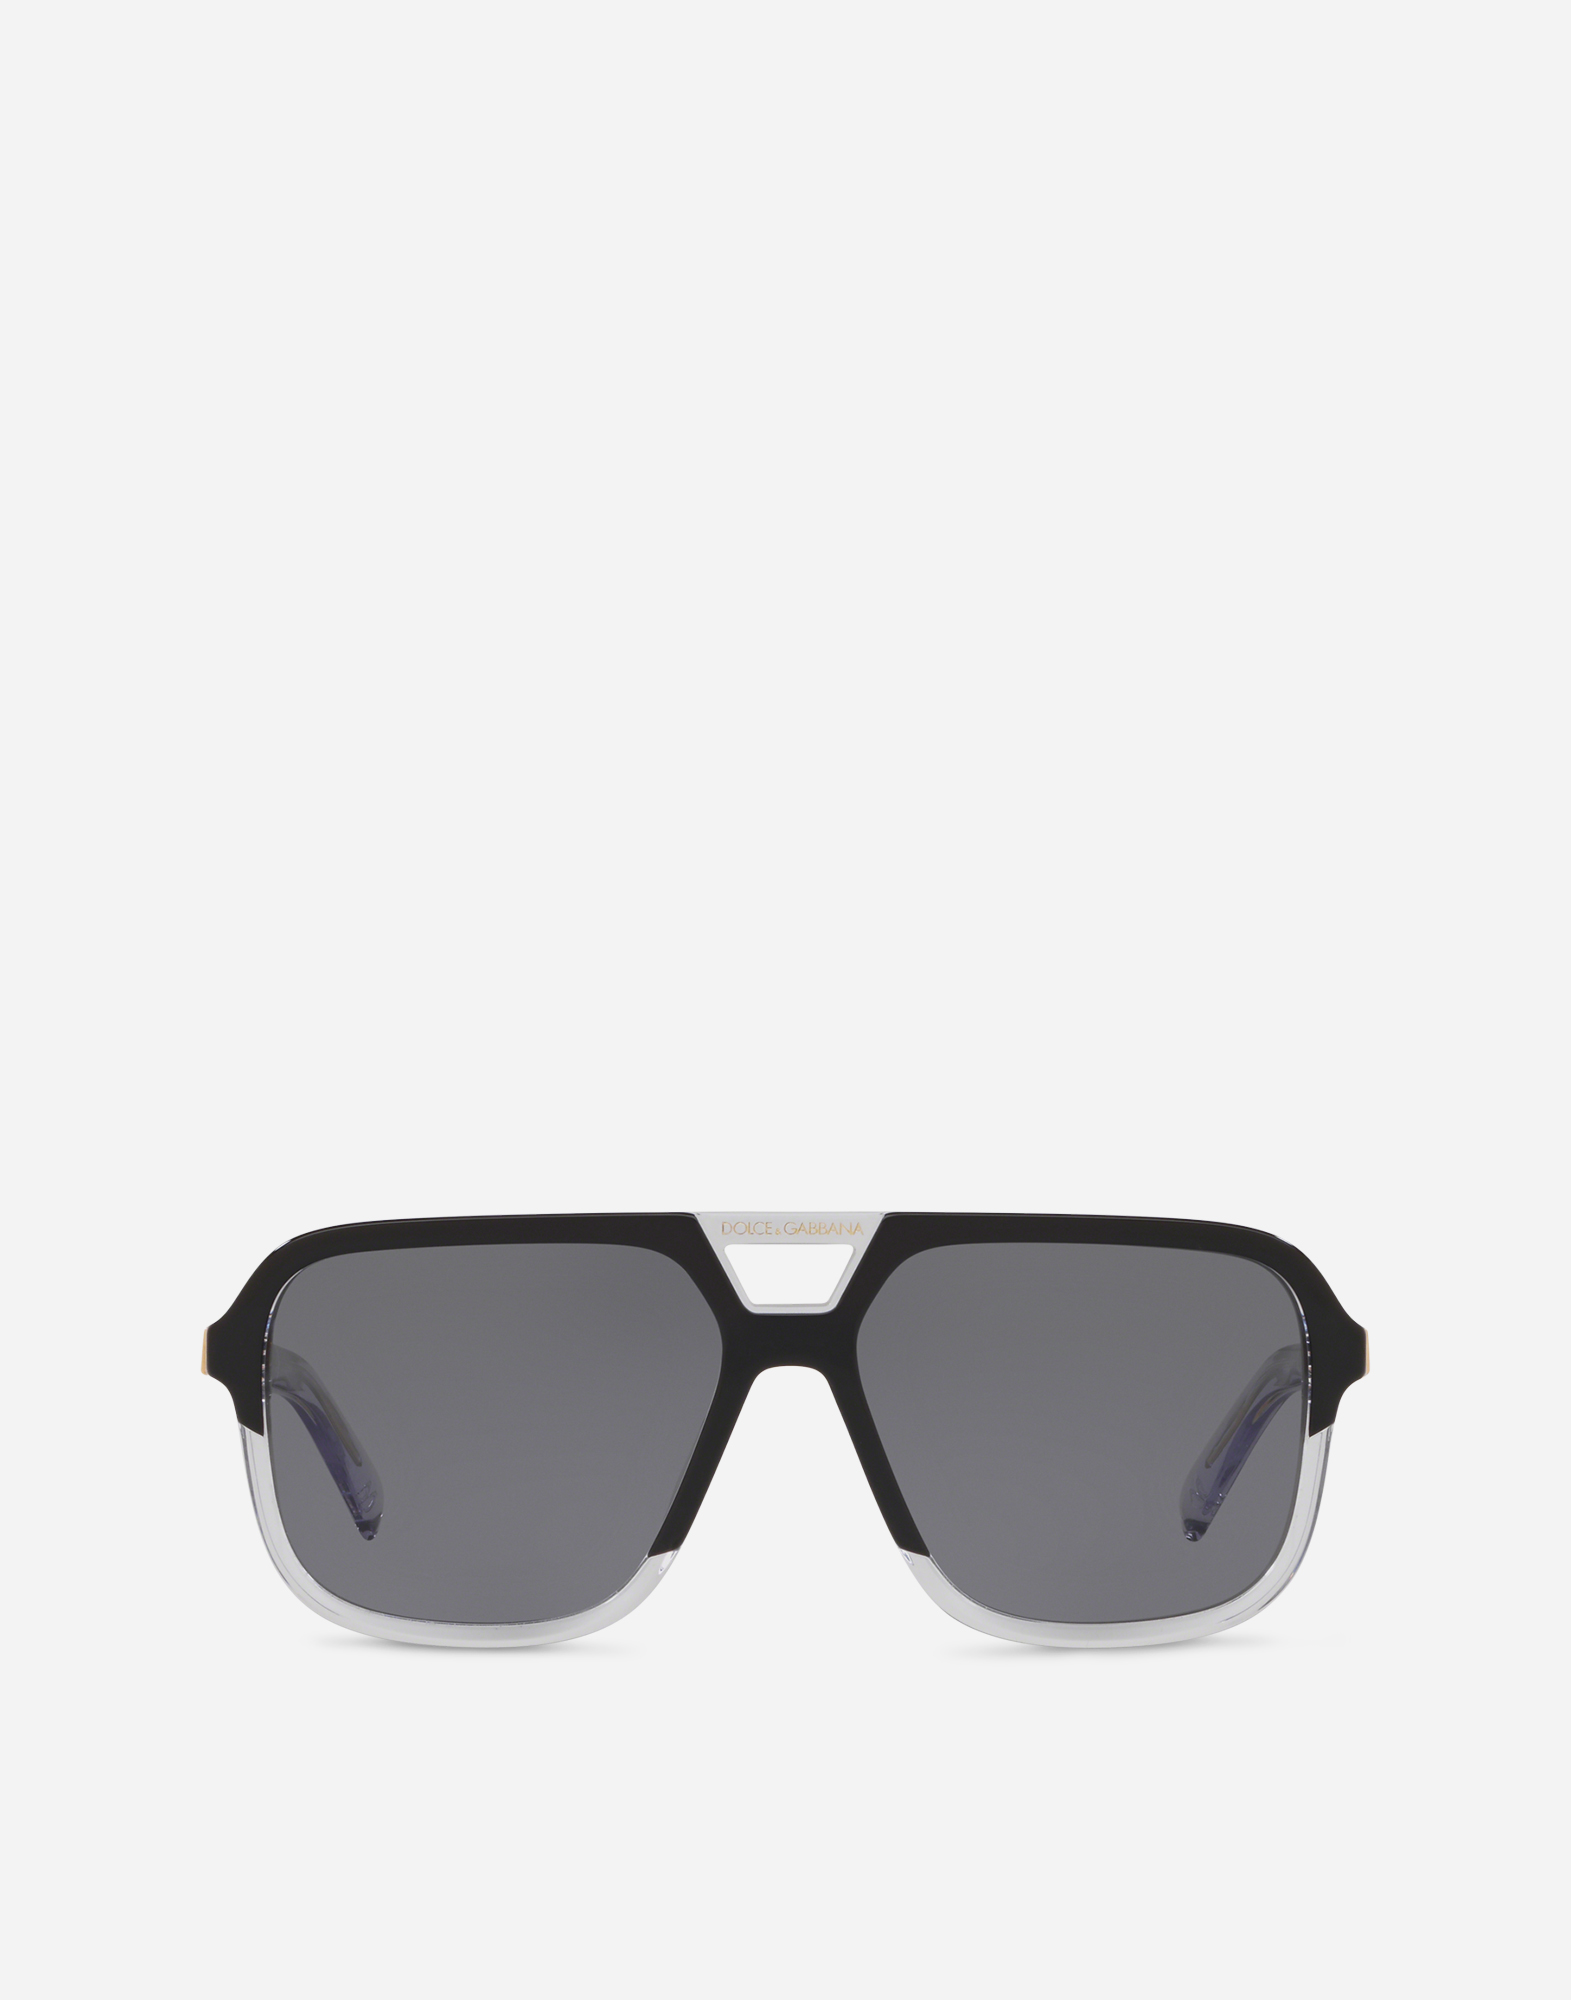 Angel sunglasses in Black and Transparent